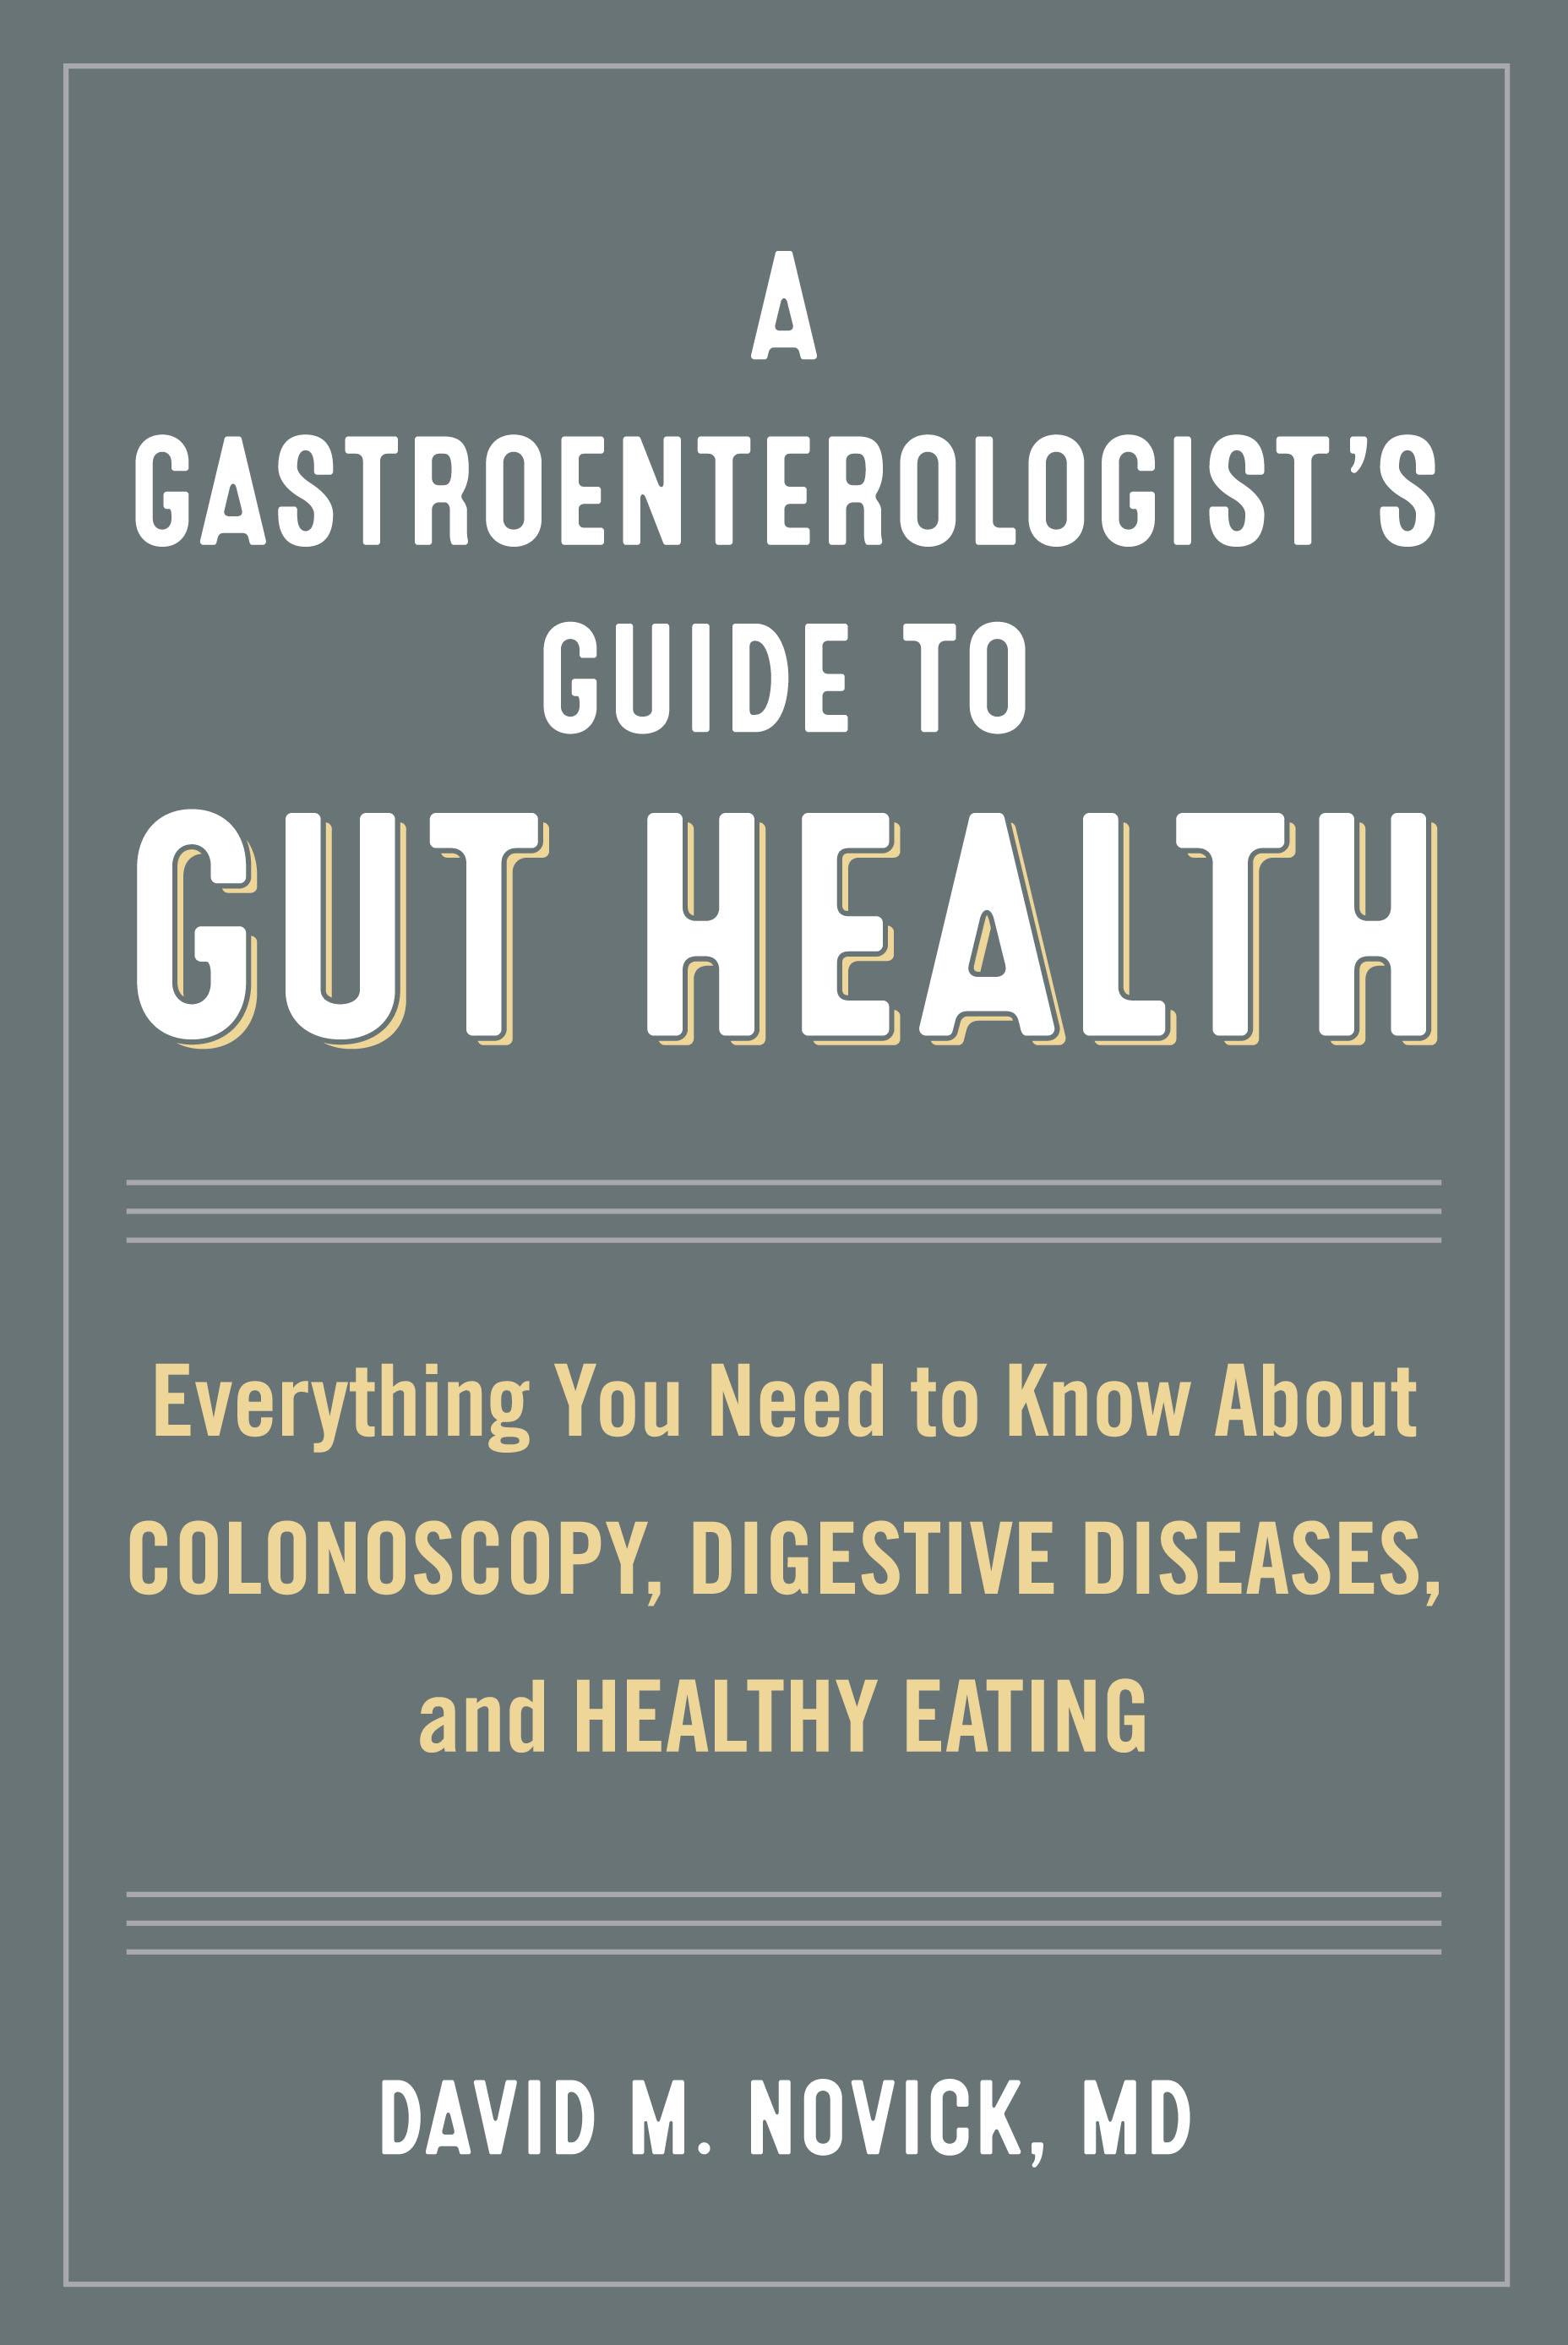 A Gastroenterologist’s Guide to Gut Health: Everything You Need to Know About Colonoscopy, Digestive Diseases, and Healthy Eating